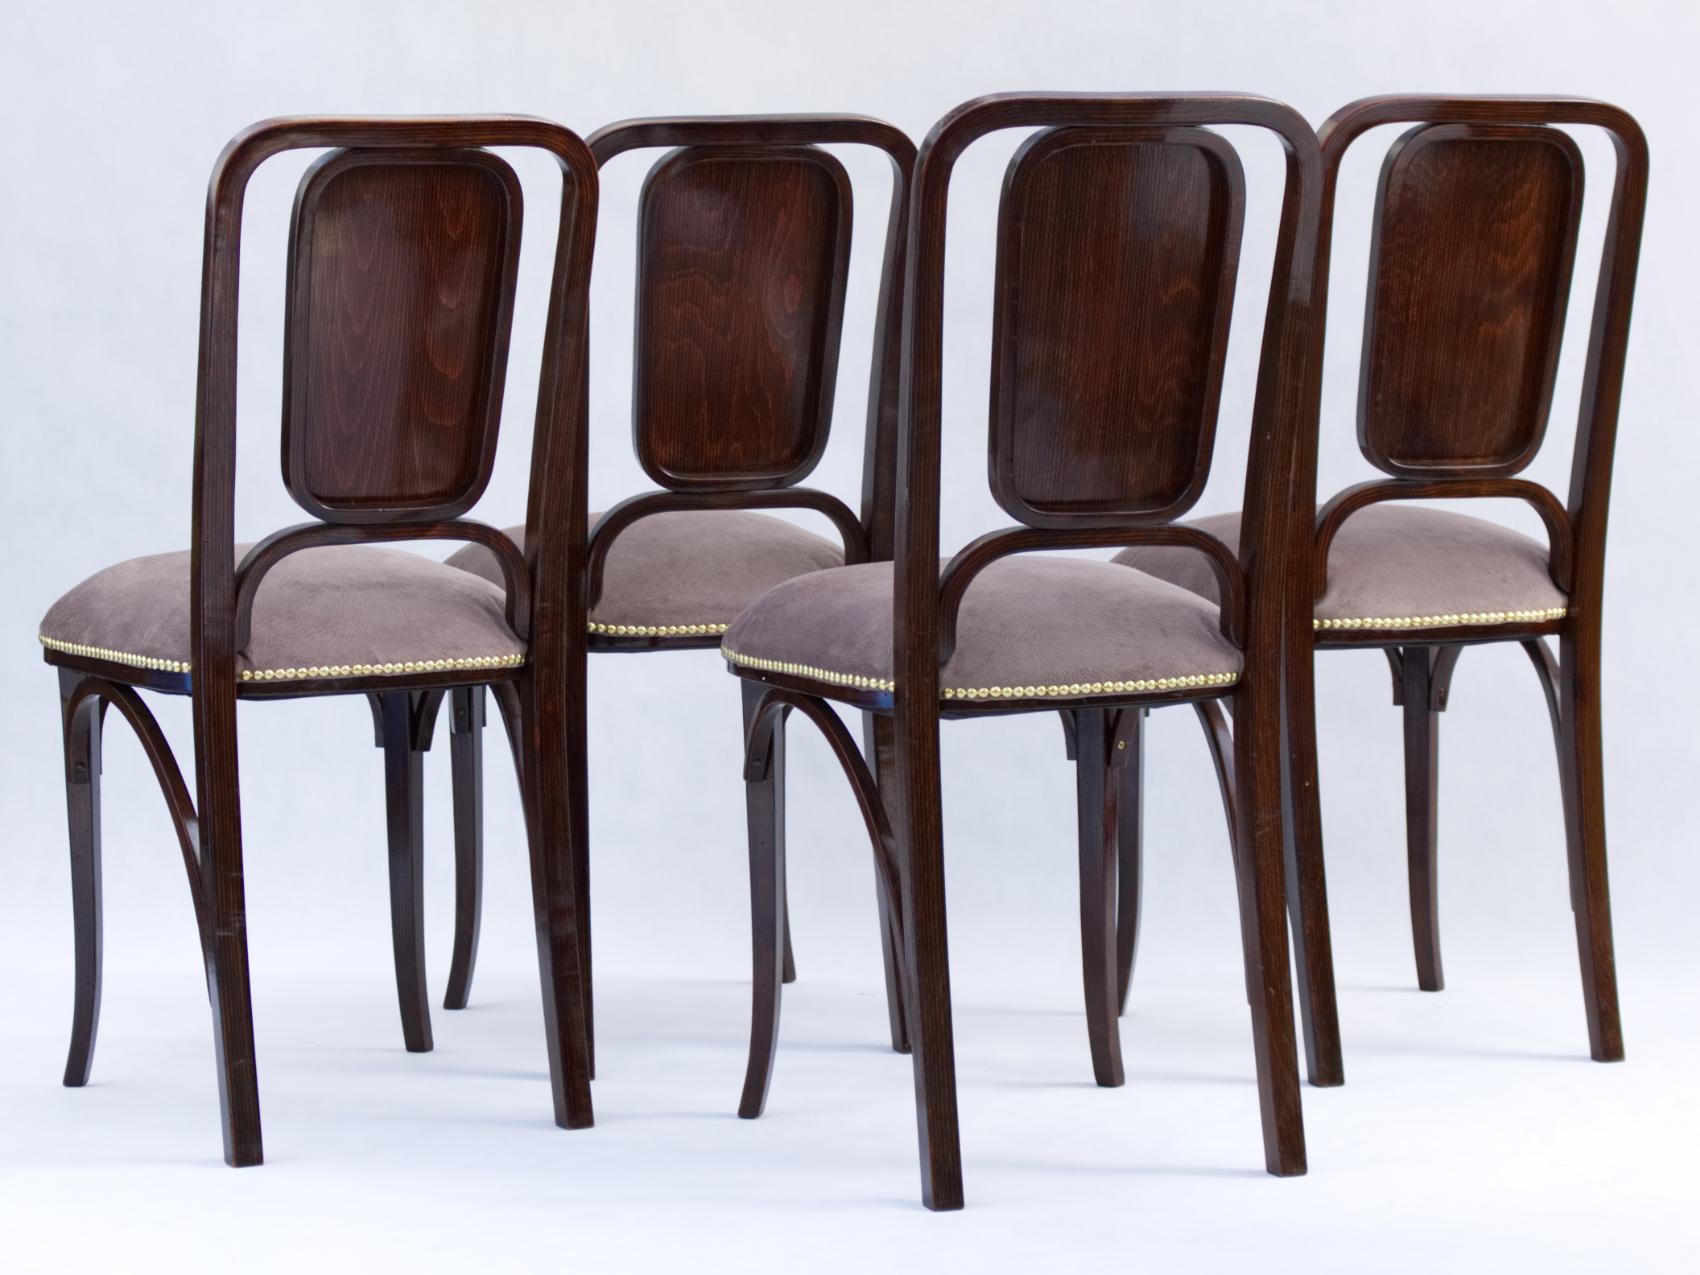 Art Nouveau Bentwood Chairs by Thonet circa 1905, Set of 4 1